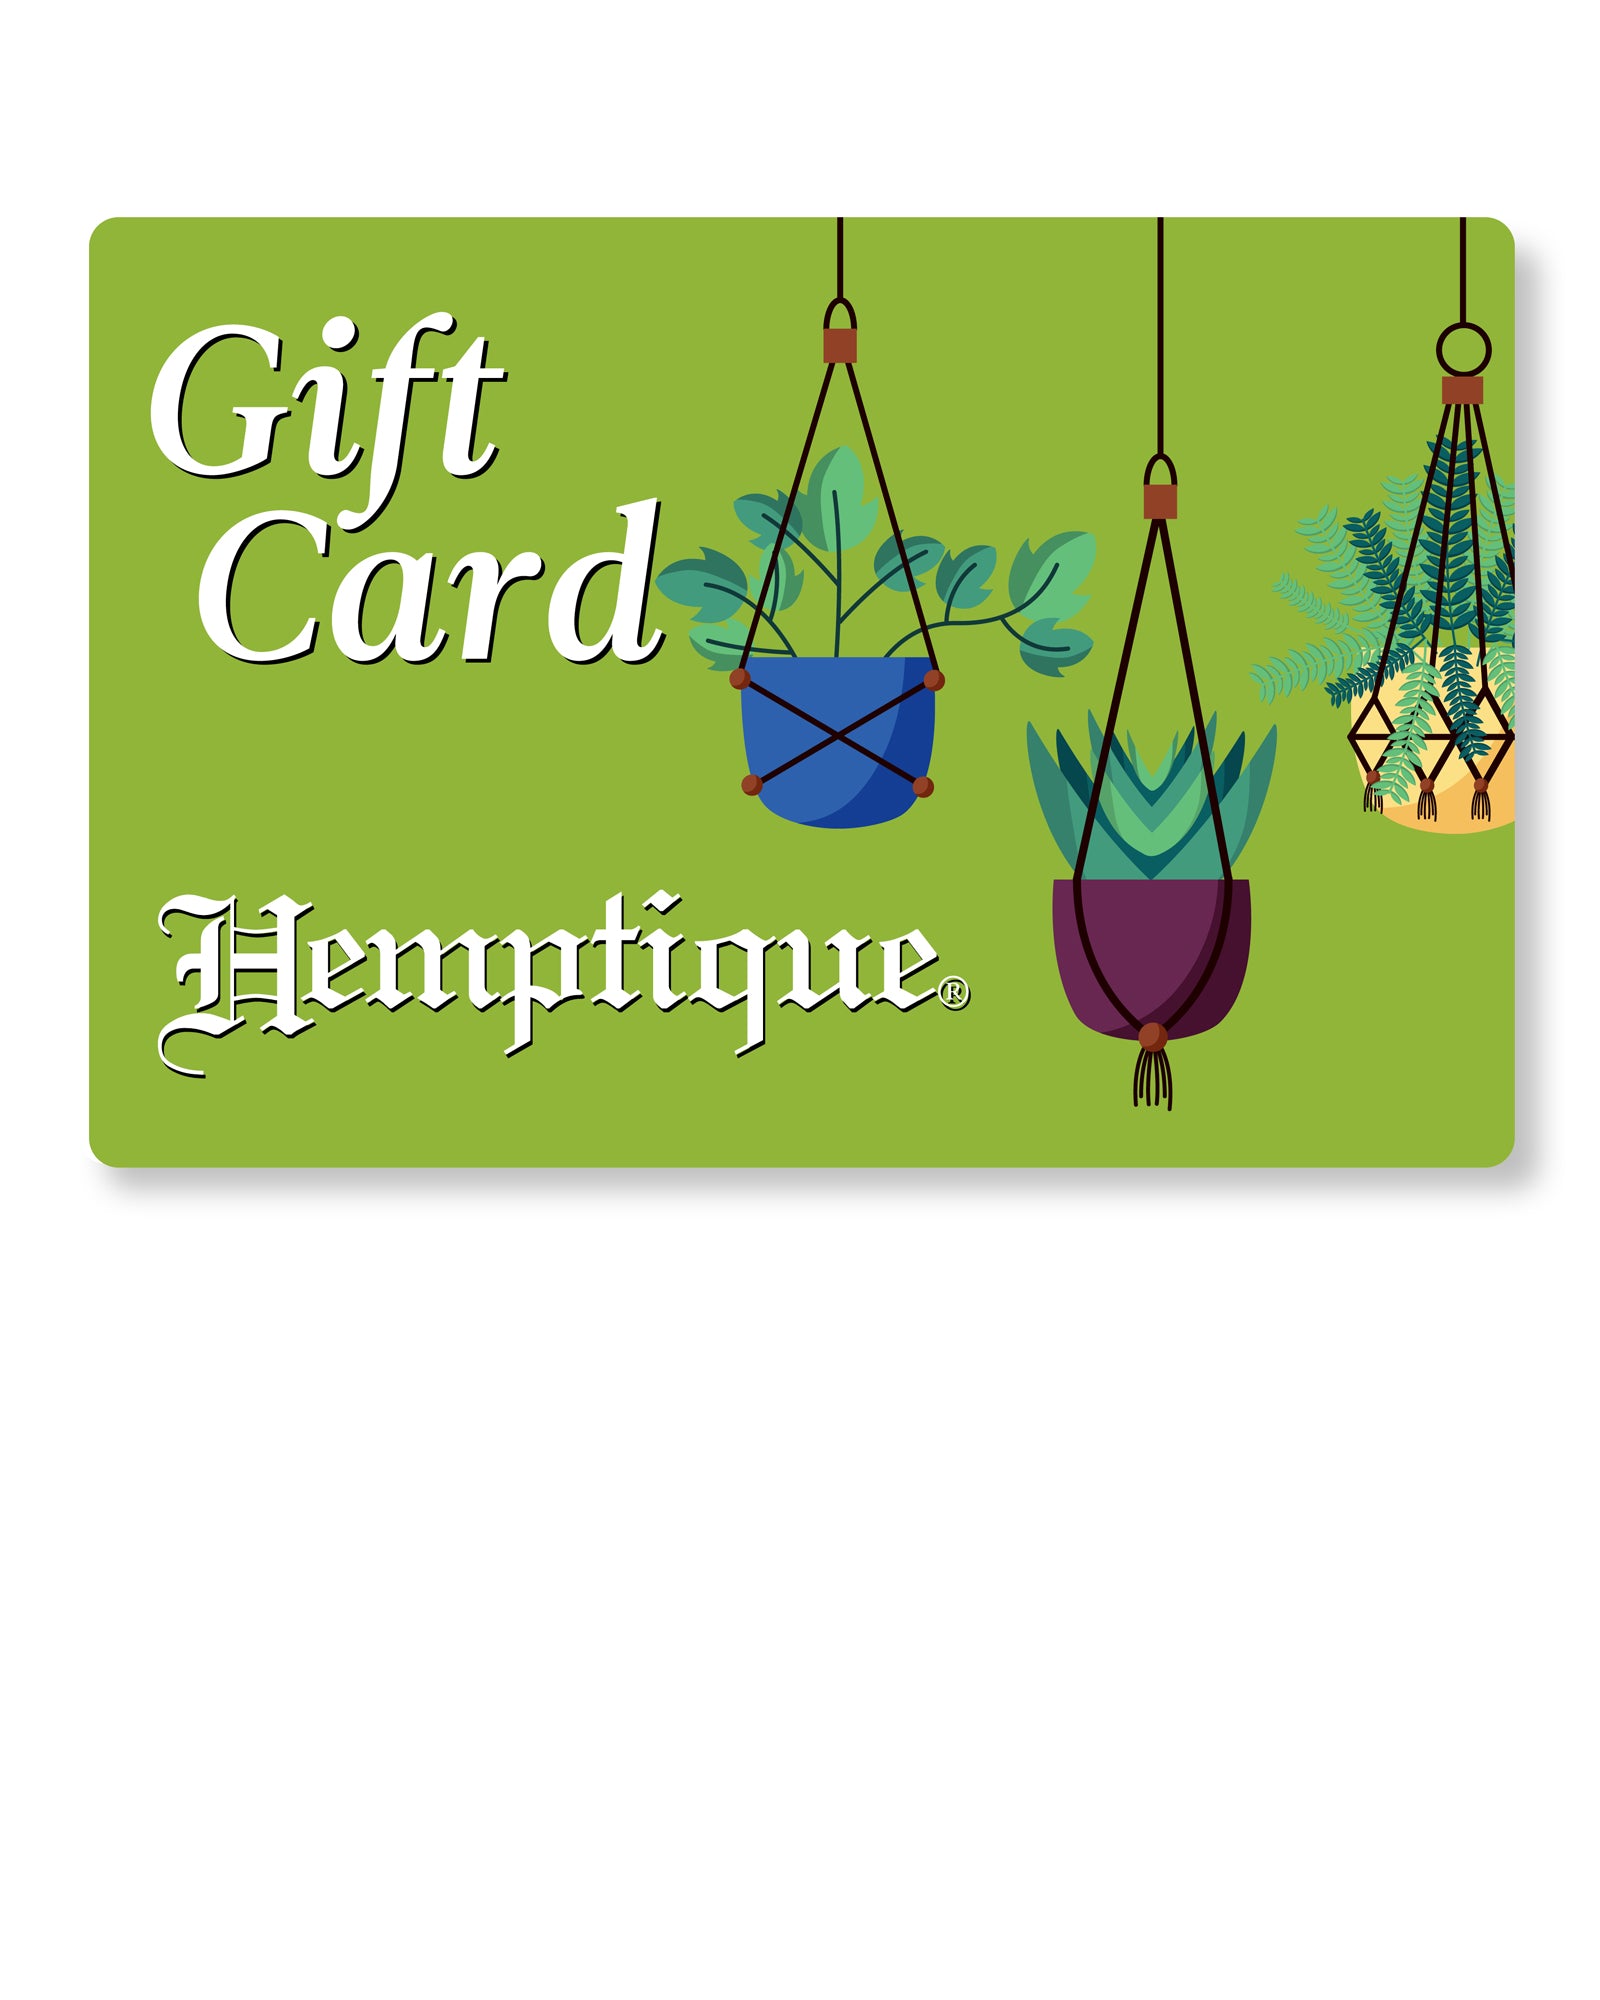 Charity|Choice Donation Gift Card: Corporate Events Giving Back, Birthday,  Branded Business Gift Ideas